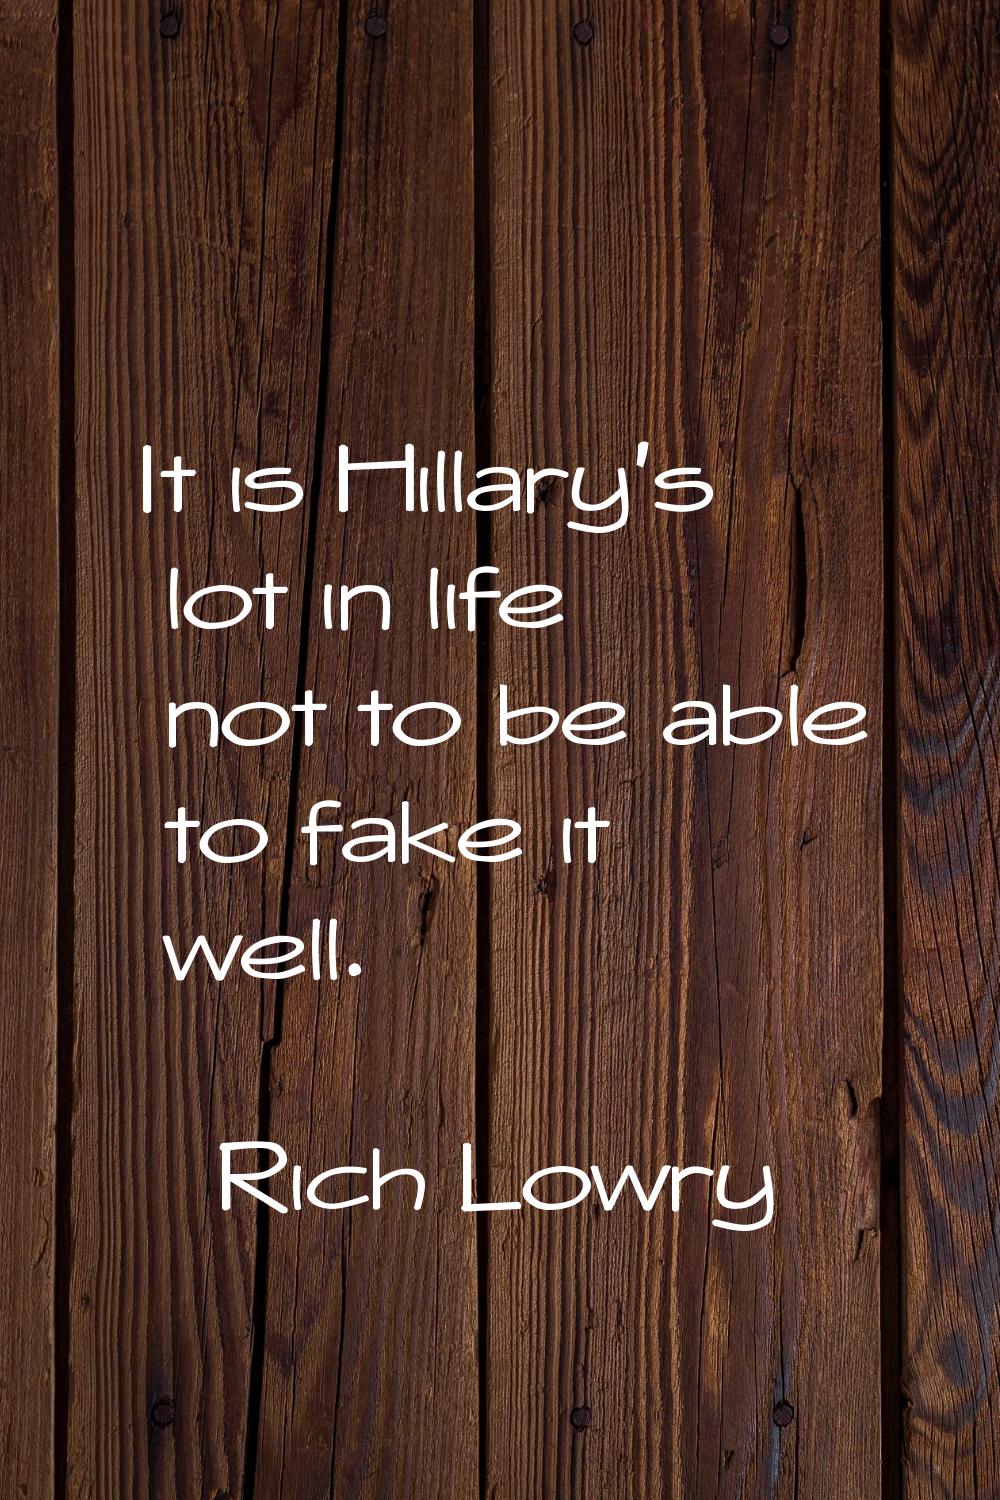 It is Hillary's lot in life not to be able to fake it well.